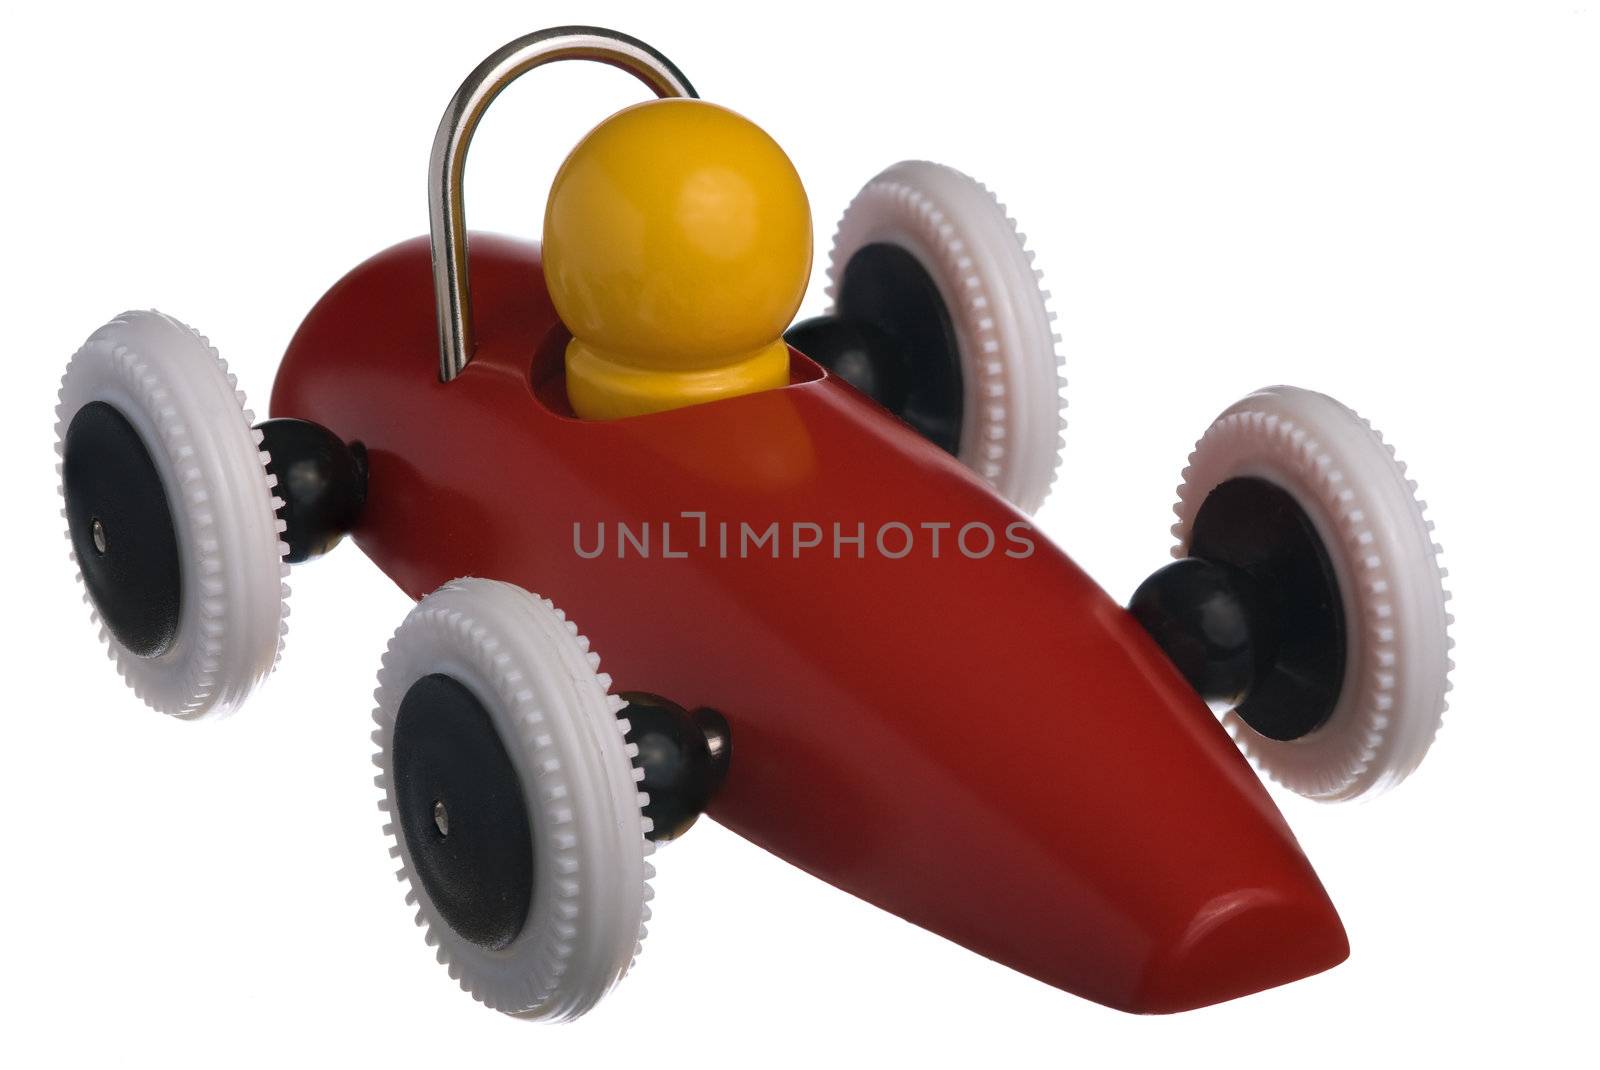 Child's red toy race car by Gjermund